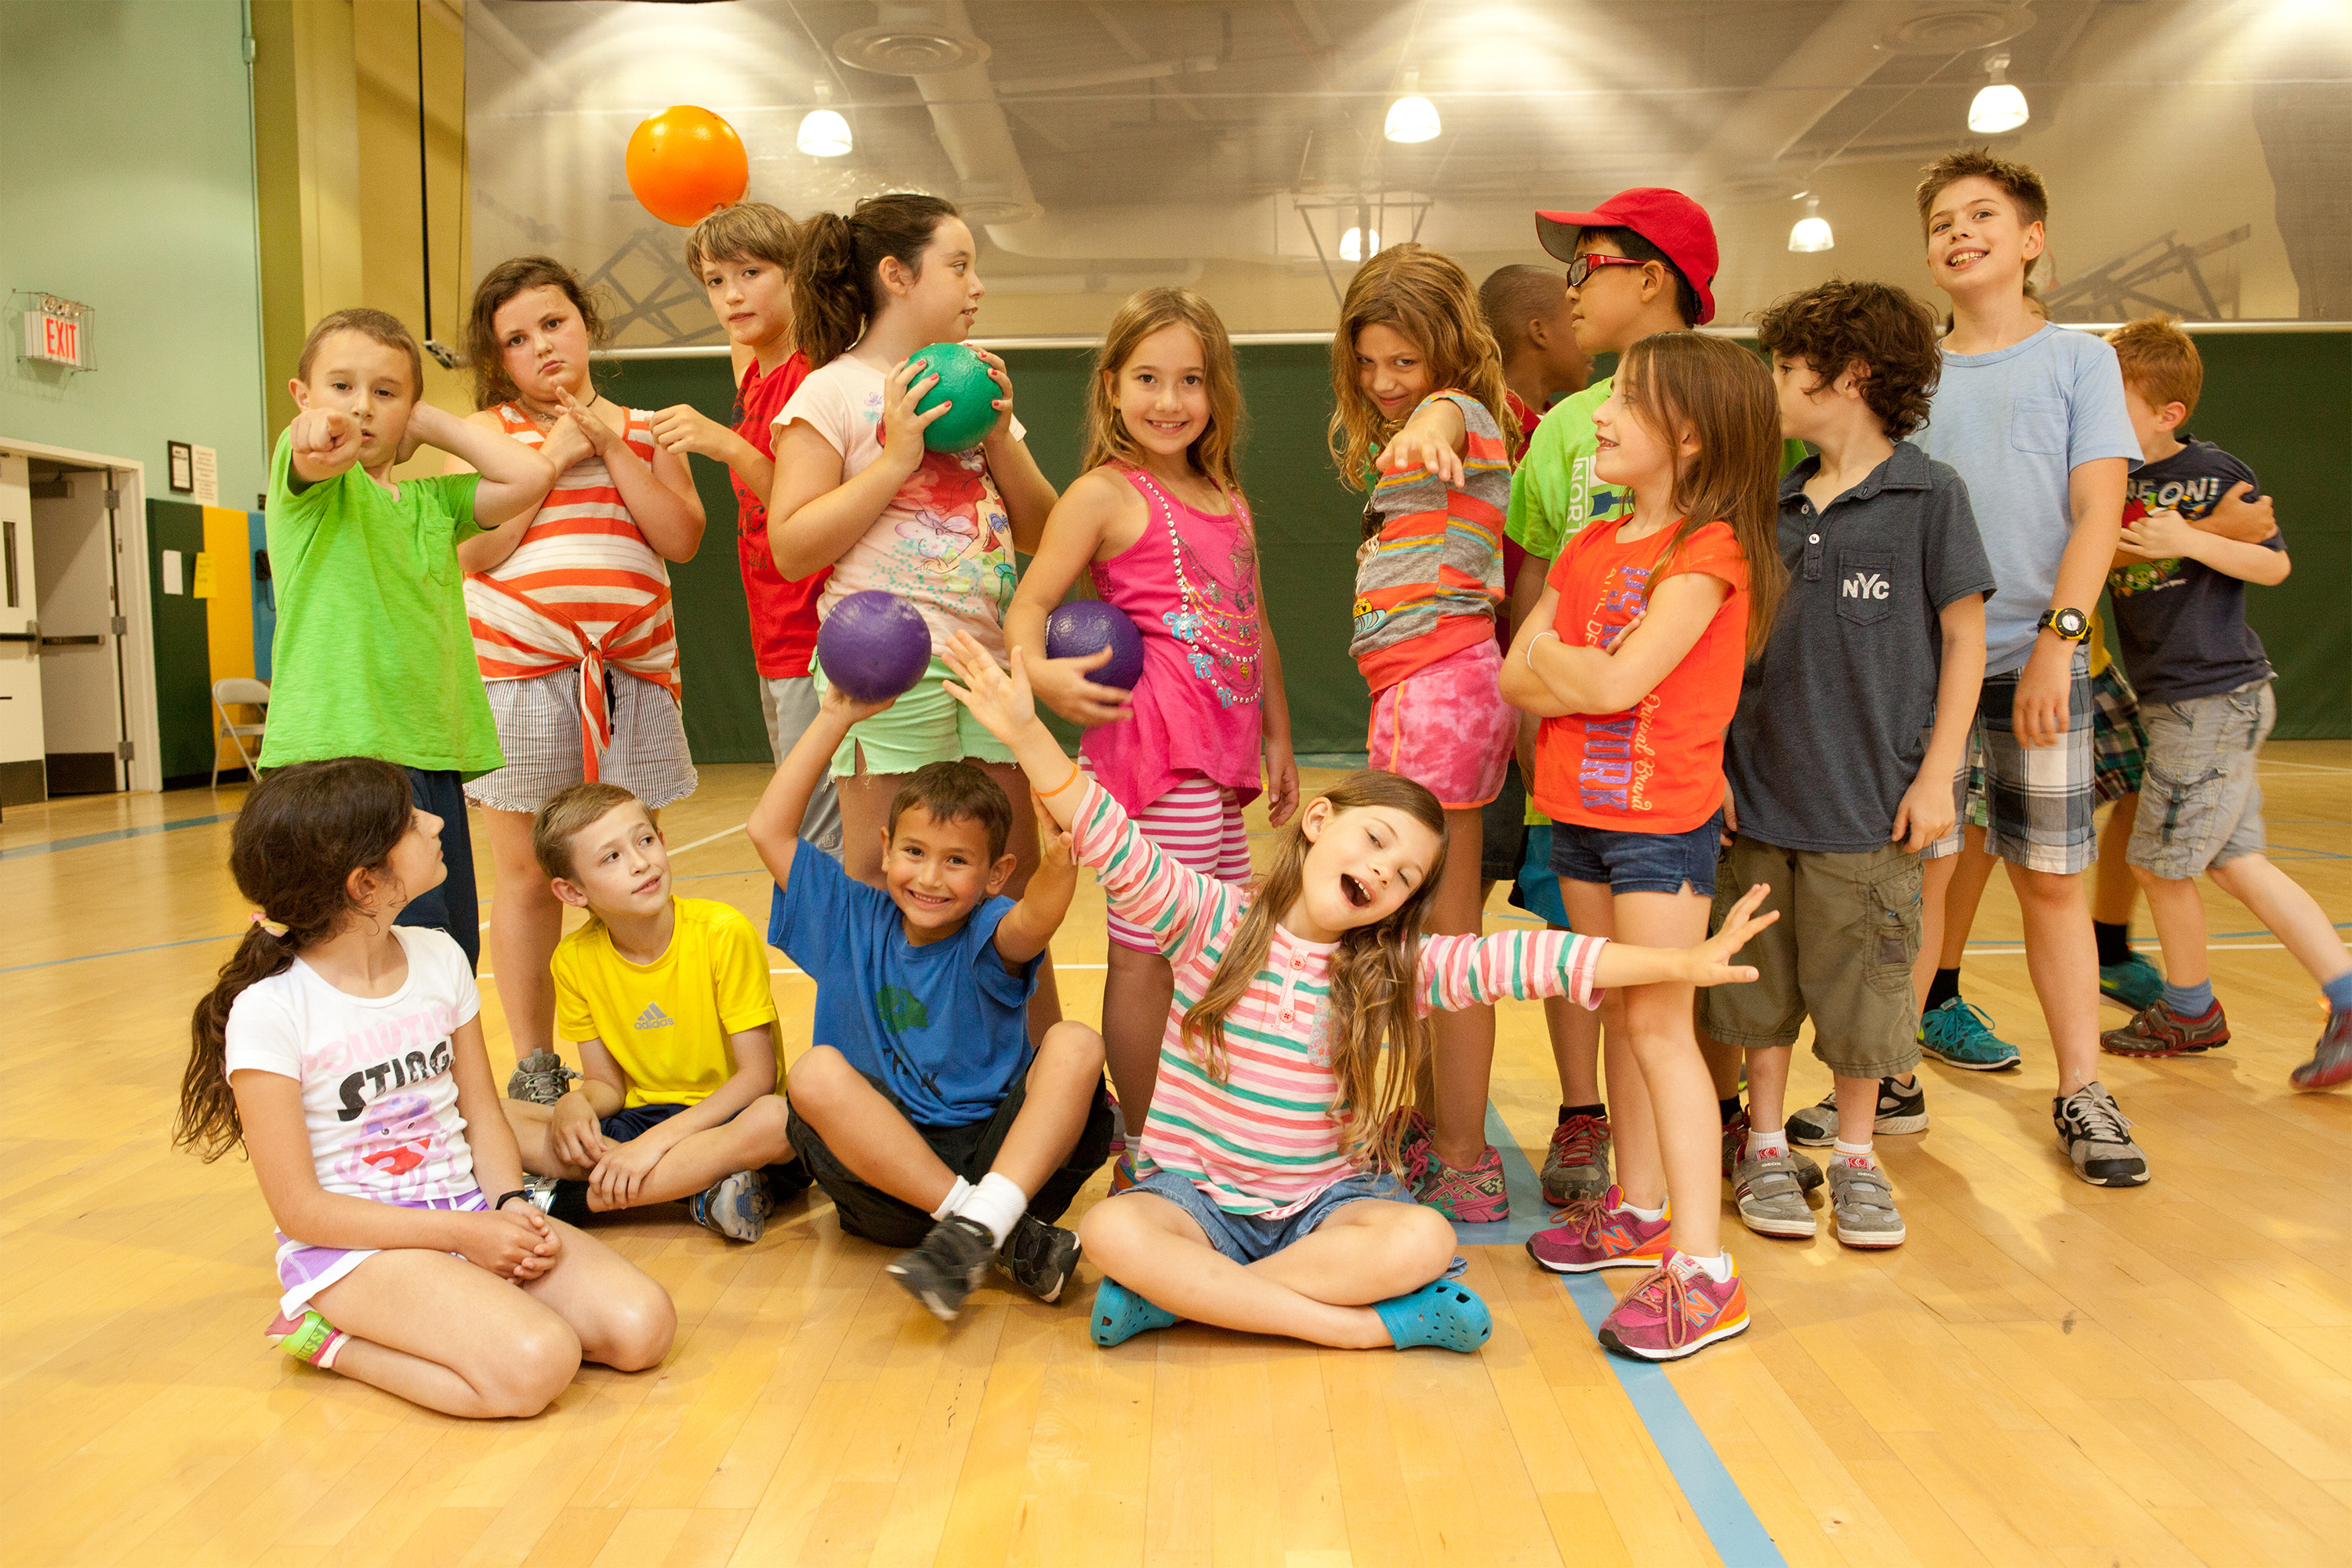 NYC PHYSIQUE SUMMER DAY CAMP at the Pine St School ...